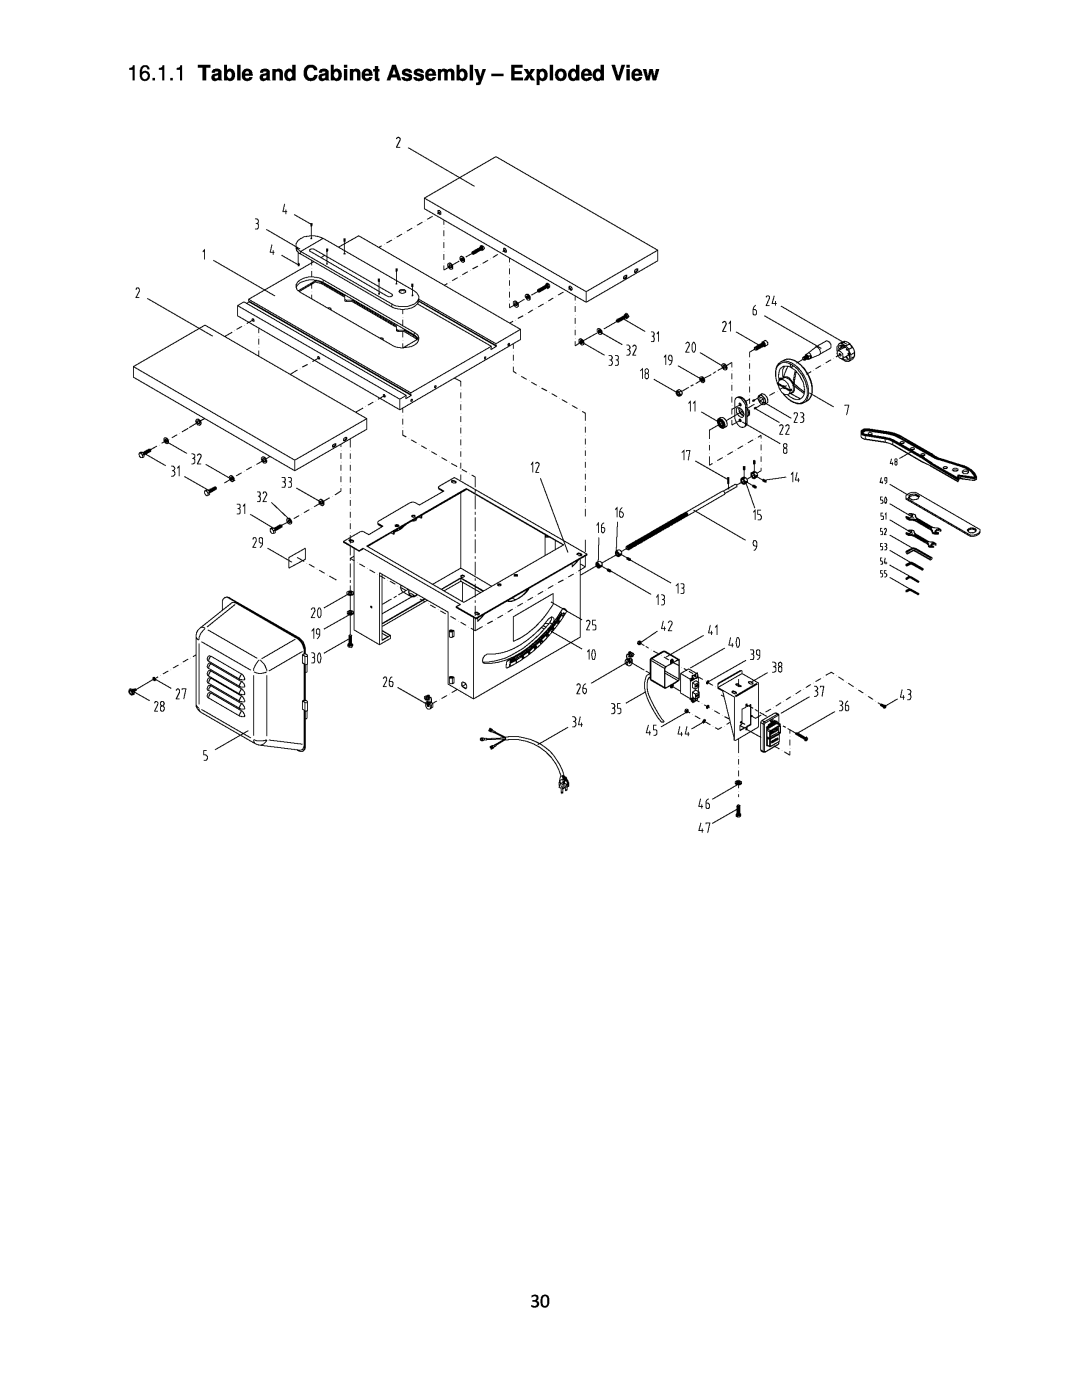 Powermatic 64B operating instructions Table and Cabinet Assembly - Exploded View 